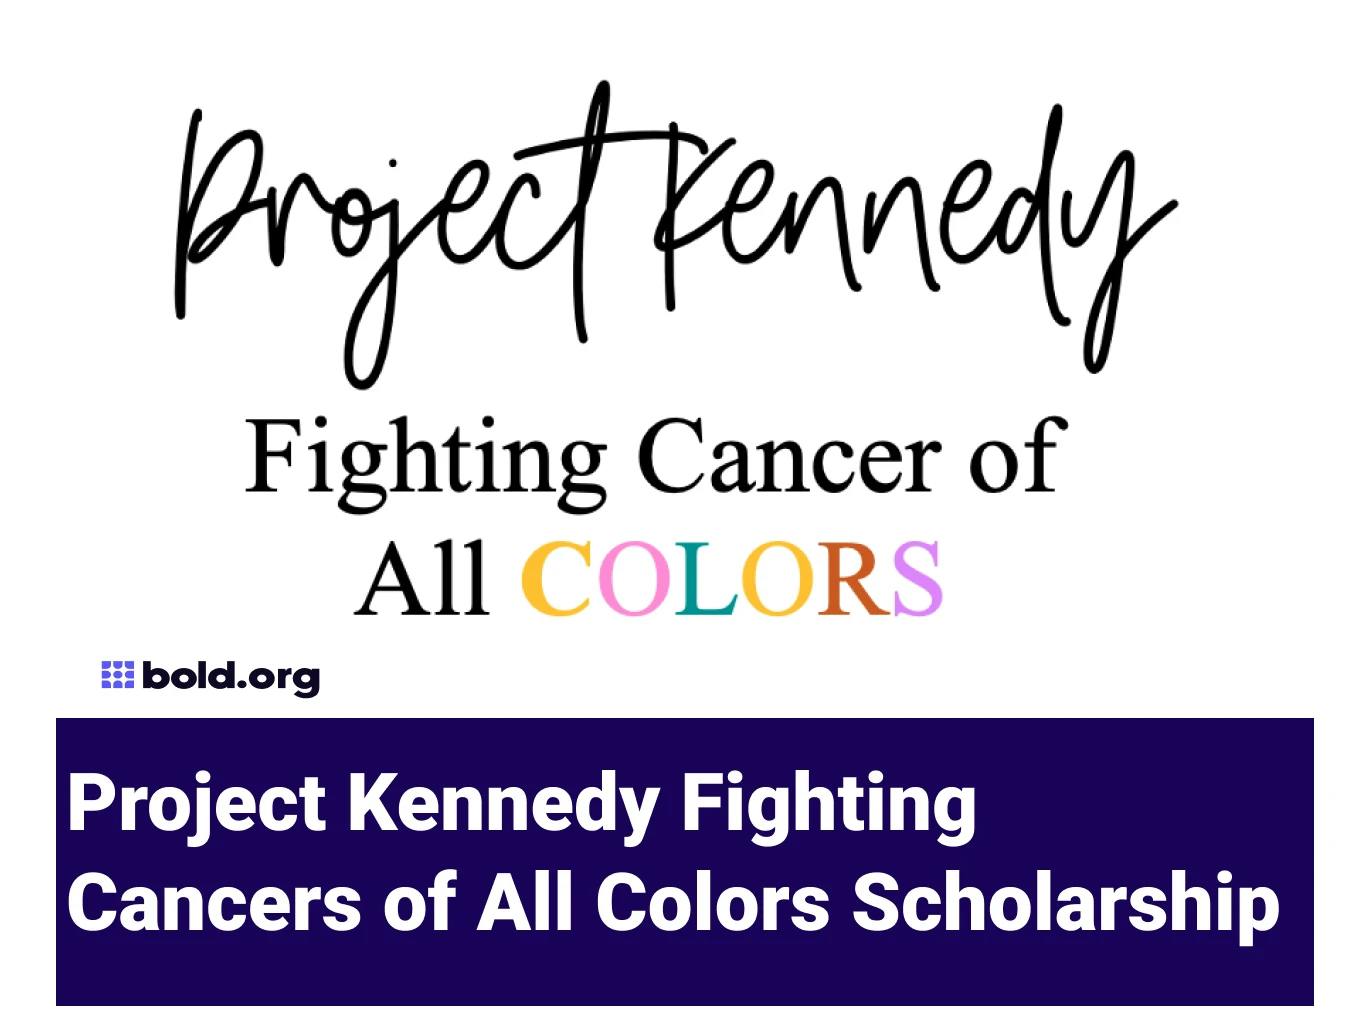 Project Kennedy Fighting Cancers of All Colors Scholarship